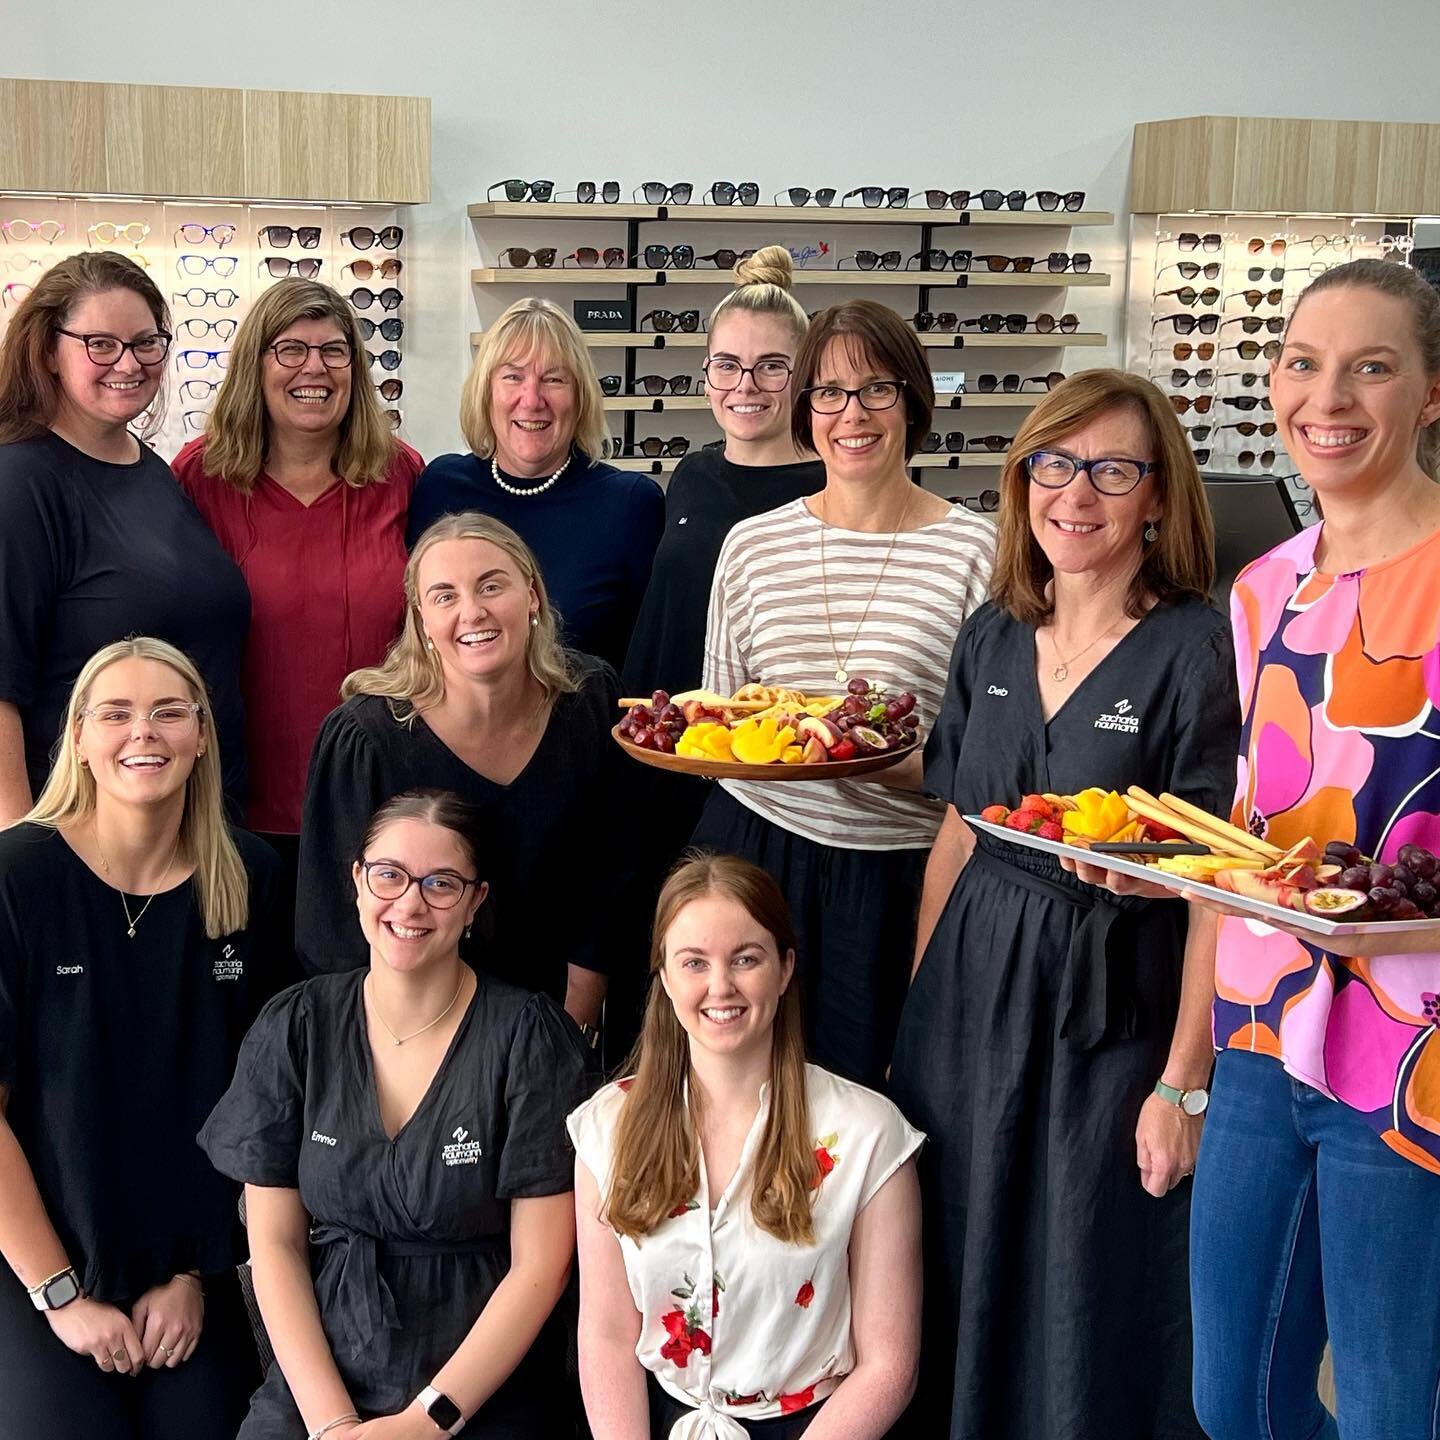 Honouring the wonderful women we work alongside everyday. Celebrating the best way we know how&hellip; a cheese platter of course! 
Happy International Women&rsquo;s Day!